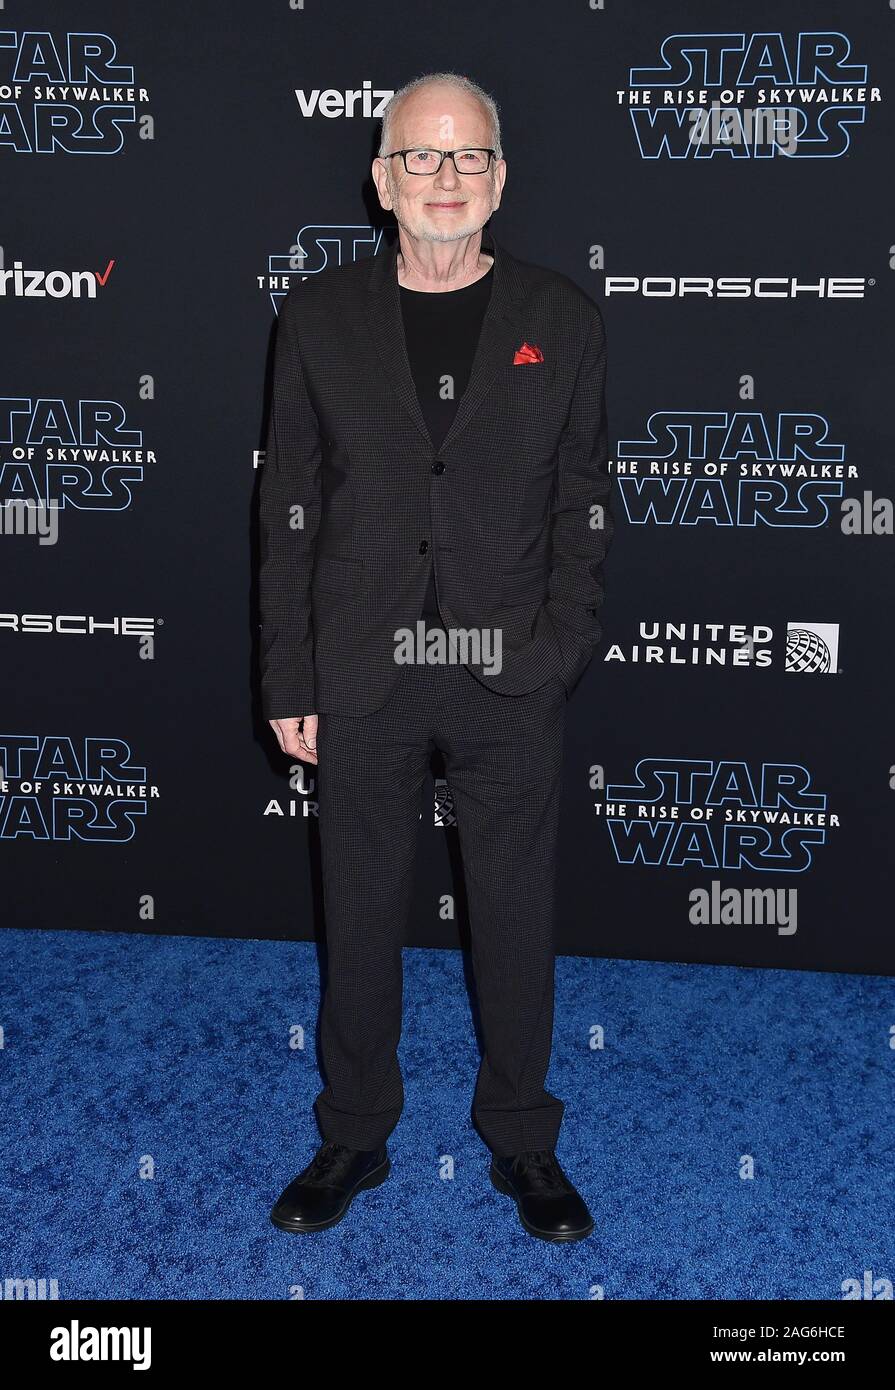 HOLLYWOOD, CA - DECEMBER 16: Ian McDiarmid attends the Premiere of Disney's 'Star Wars: The Rise Of Skywalker' at the El Capitan Theatre on December 16, 2019 in Hollywood, California. Stock Photo